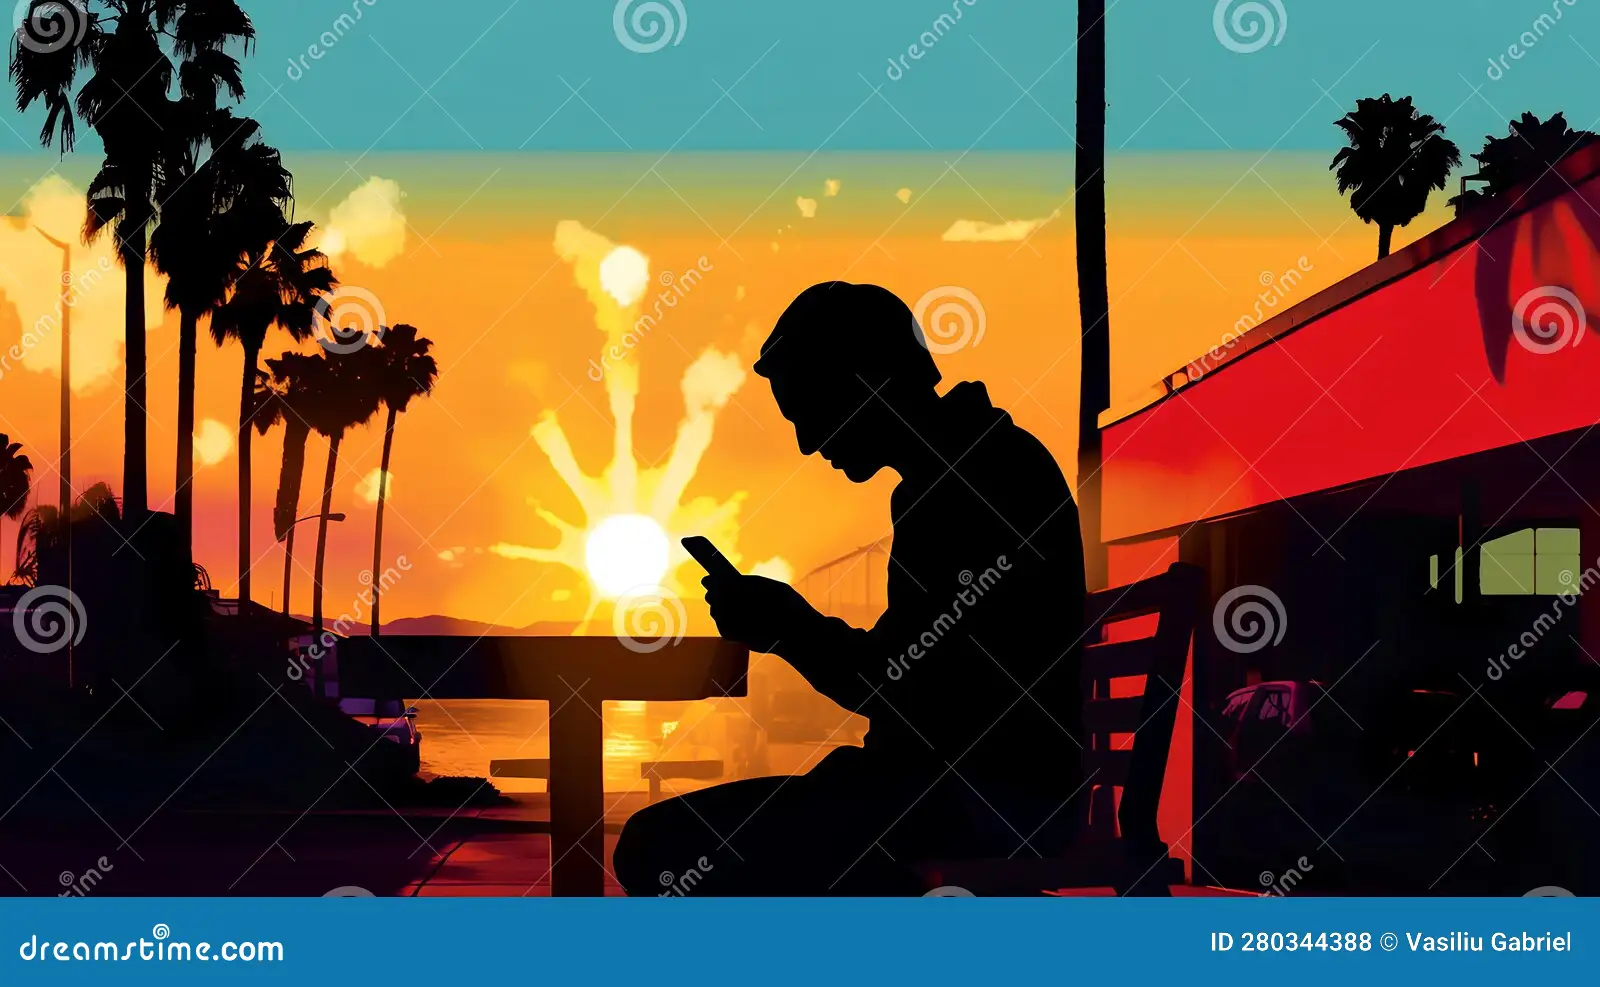 Silhouette of person using their phone 